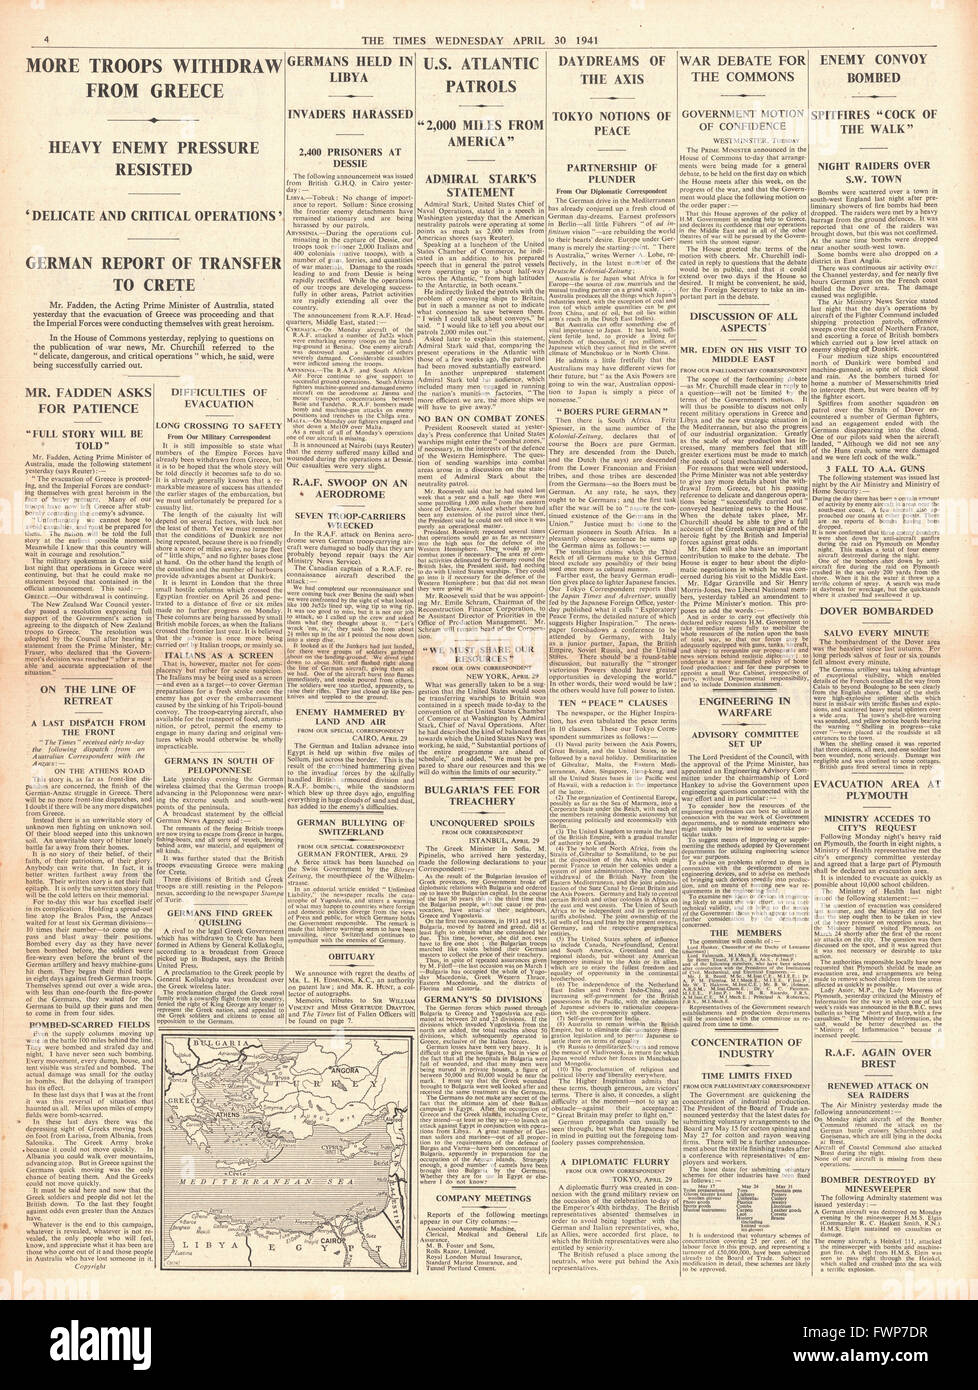 1941 page 4 The Times Allied Forces withdraw from Greece and U.S. Navy assist in Battle of Atlantic Stock Photo